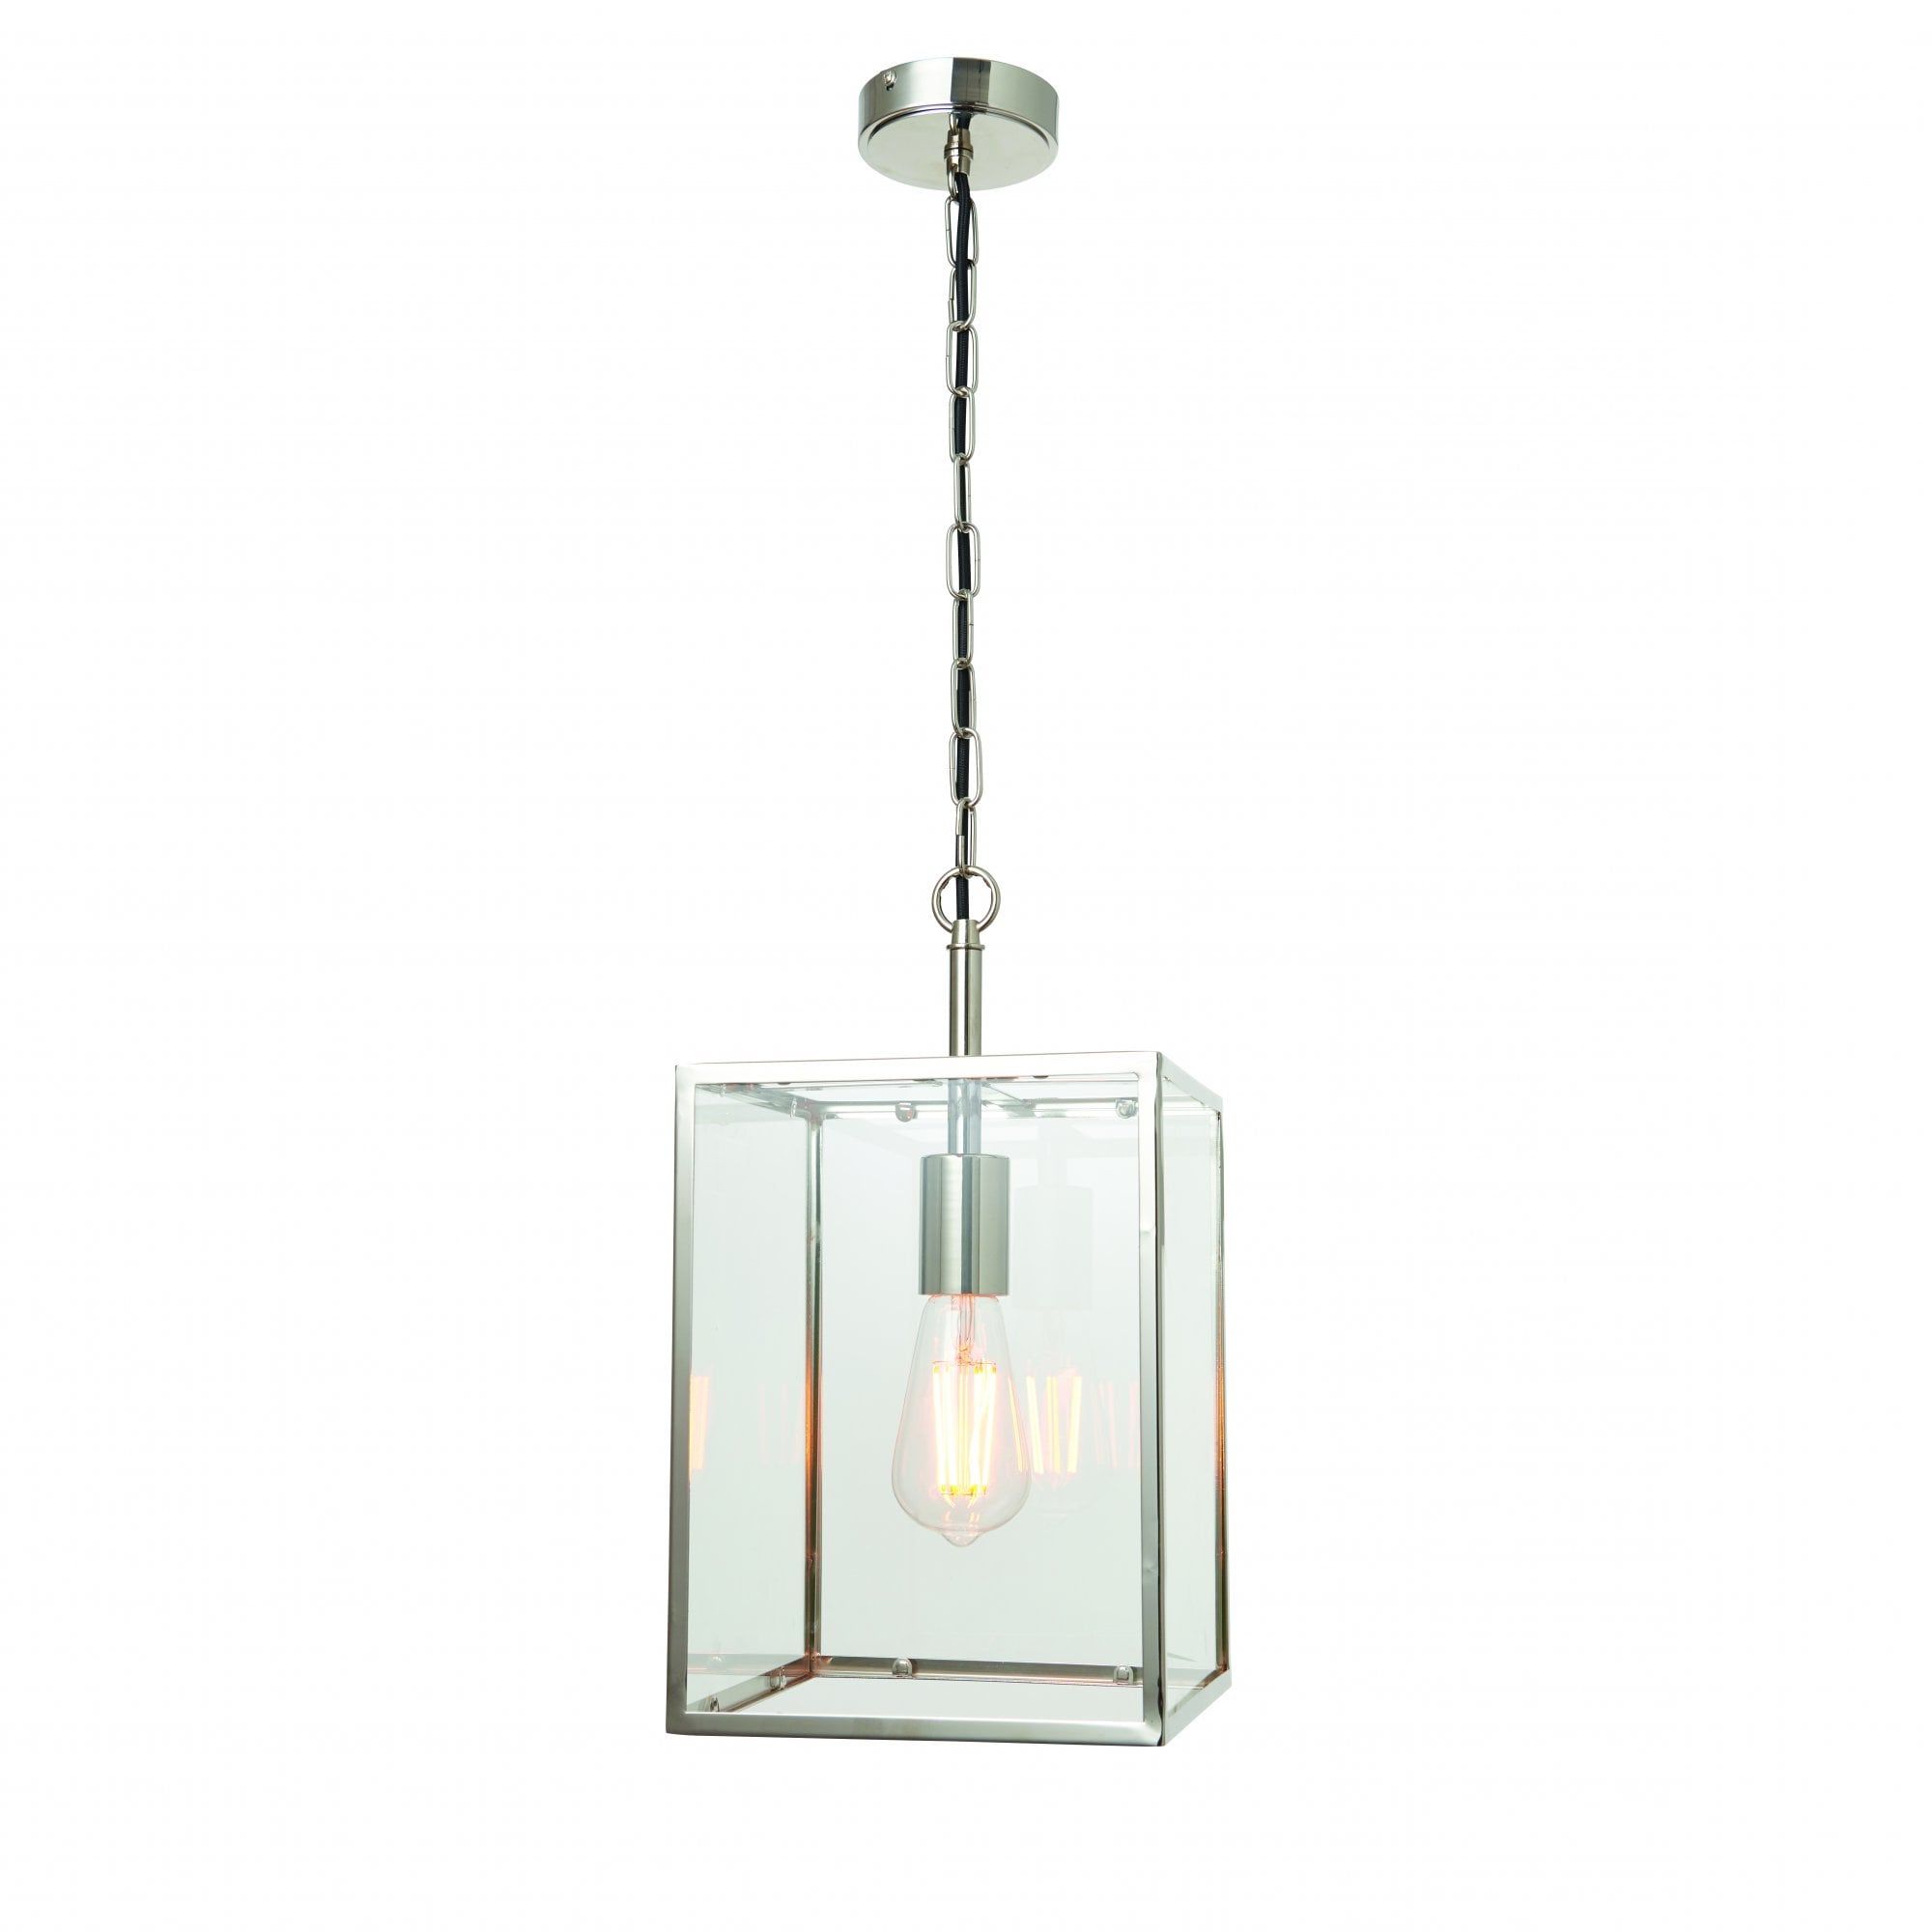 2019 Lantern Chandeliers With Transparent Glass Inside Pendant 40w Bright Nickel Plate & Clear Glass (View 1 of 15)